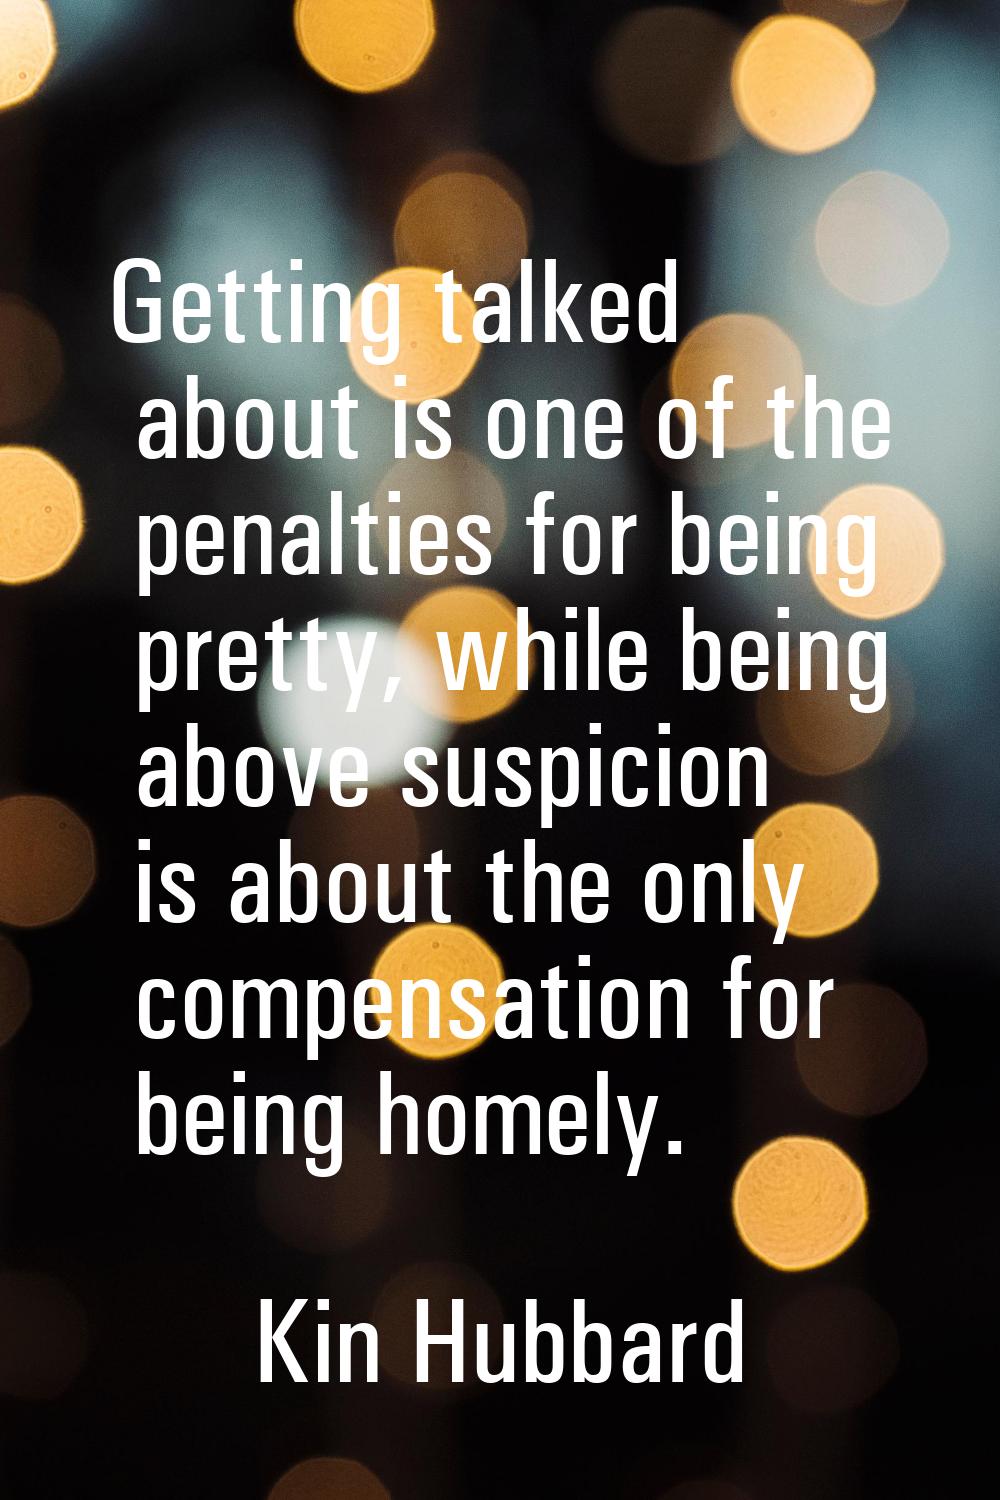 Getting talked about is one of the penalties for being pretty, while being above suspicion is about